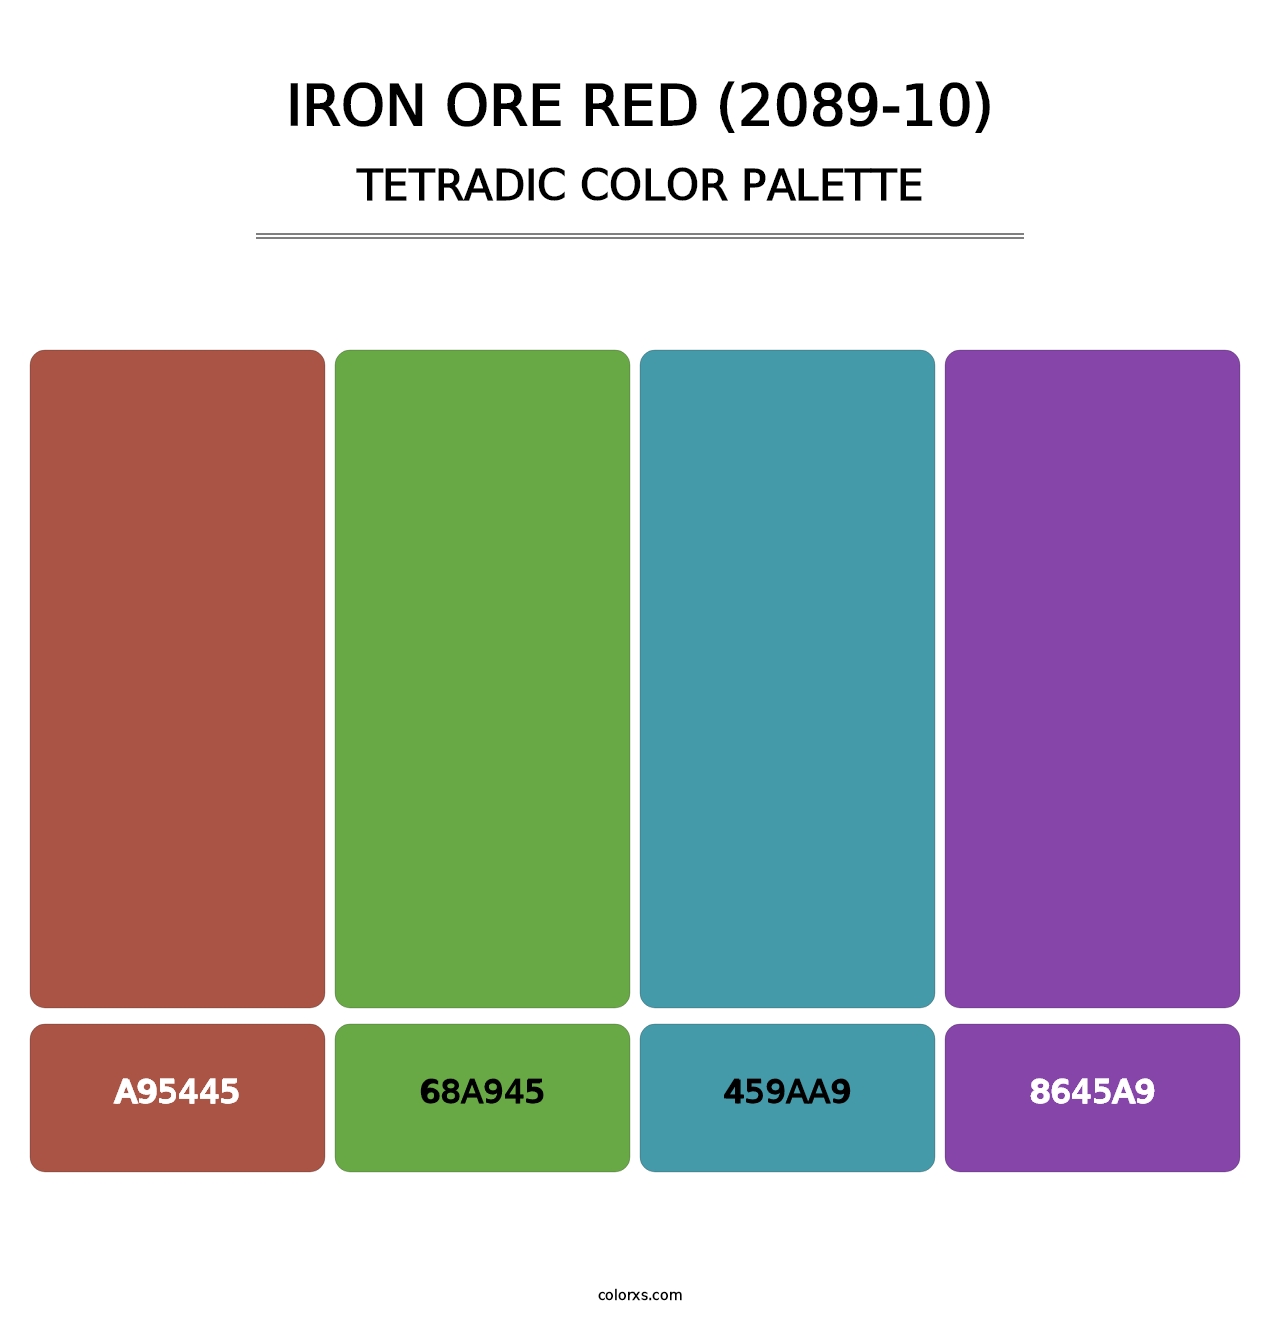 Iron Ore Red (2089-10) - Tetradic Color Palette